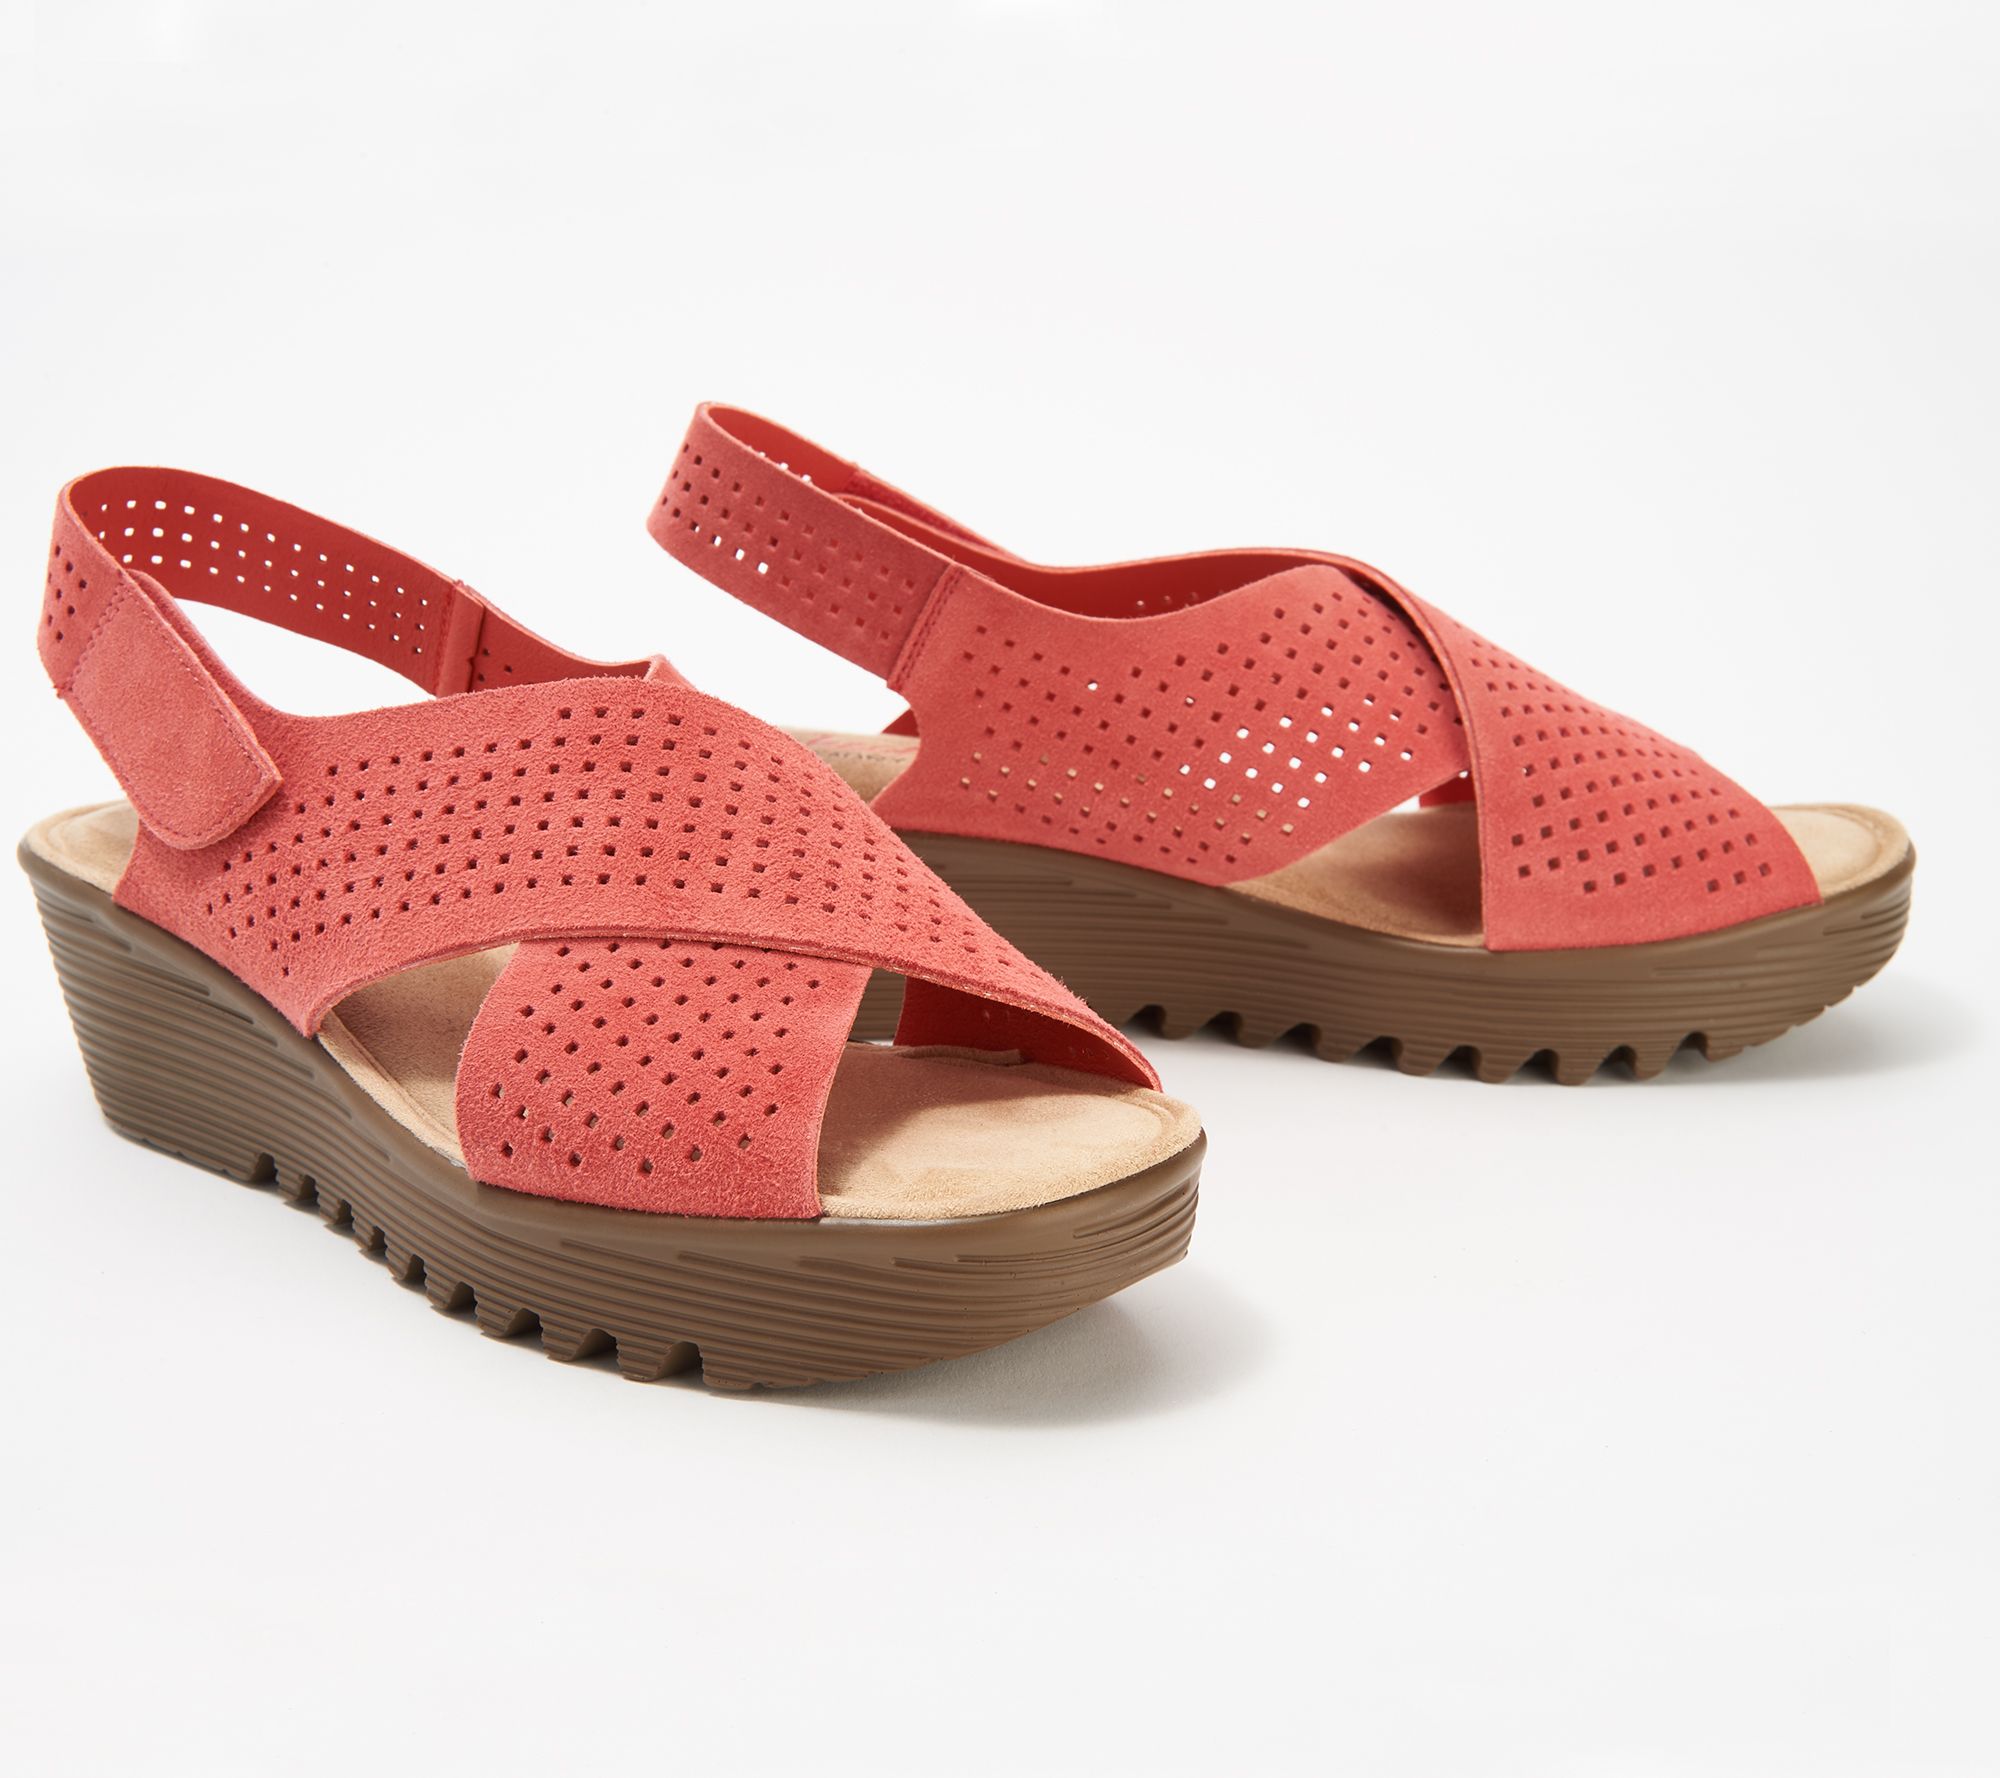 Skechers Perforated Suede Slingback 